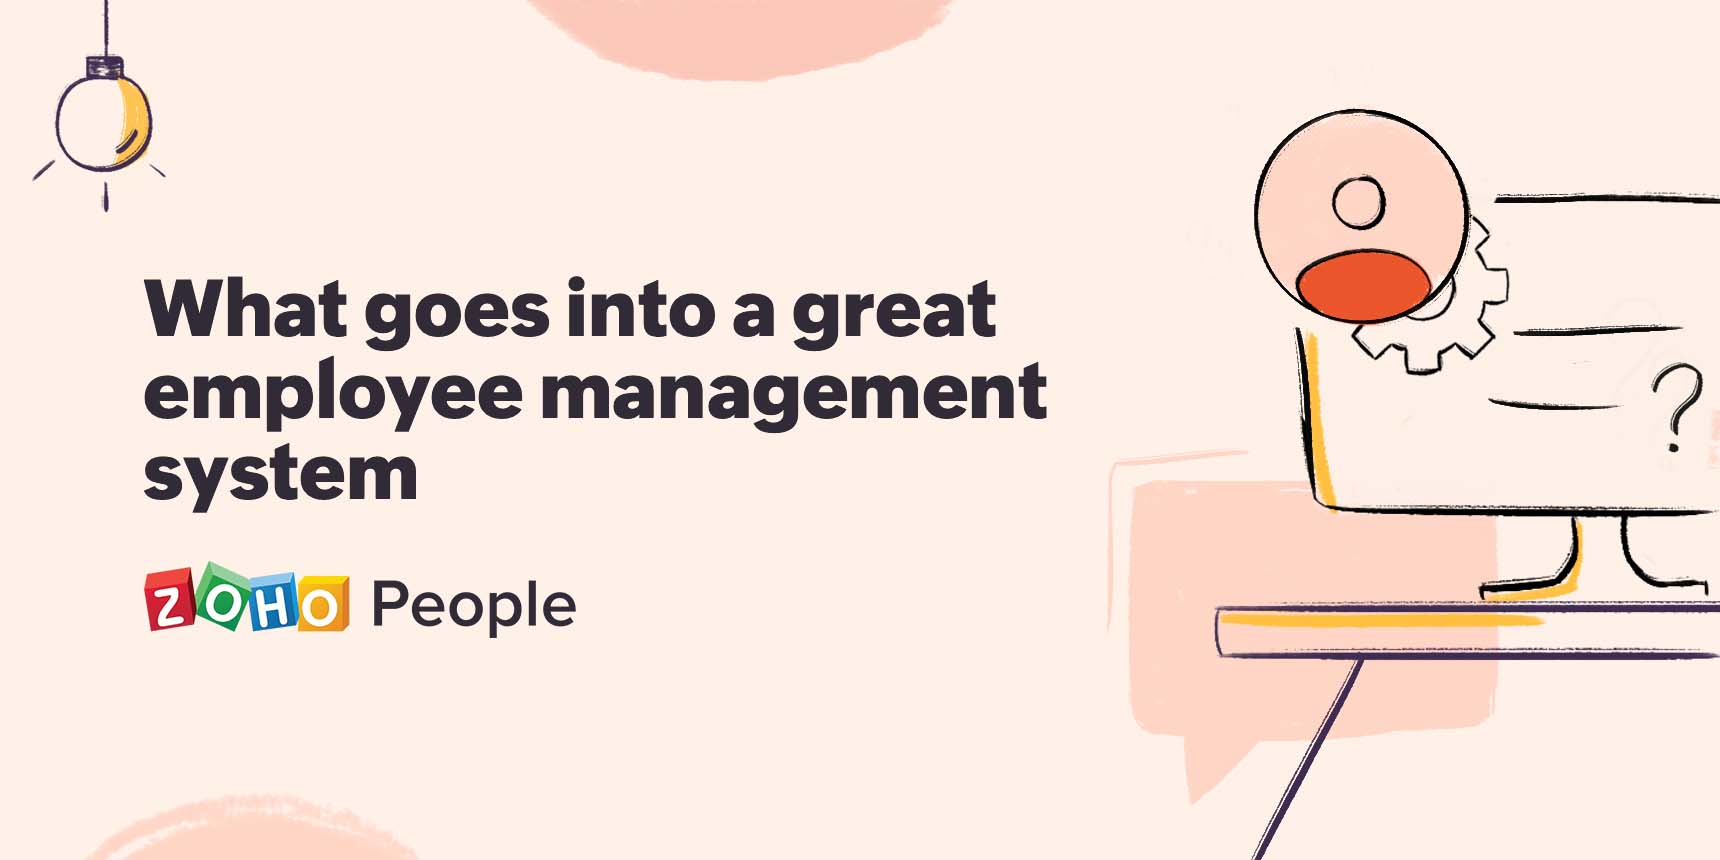 6 features that make up an employee management system